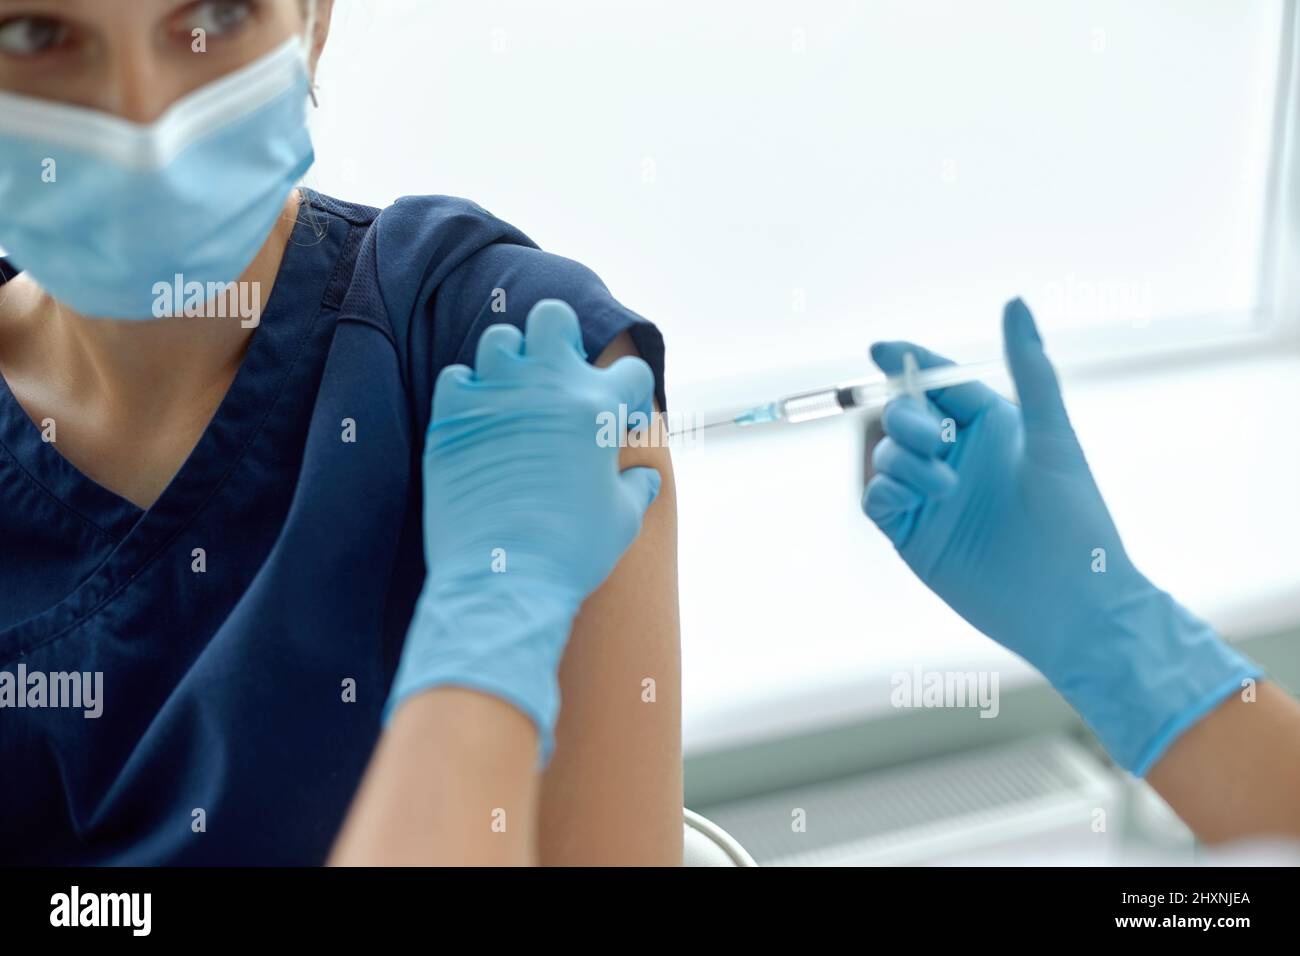 Woman in medical face mask getting injection at hospital. Doctor or nurse preparing syringe to give shot to female patient Stock Photo